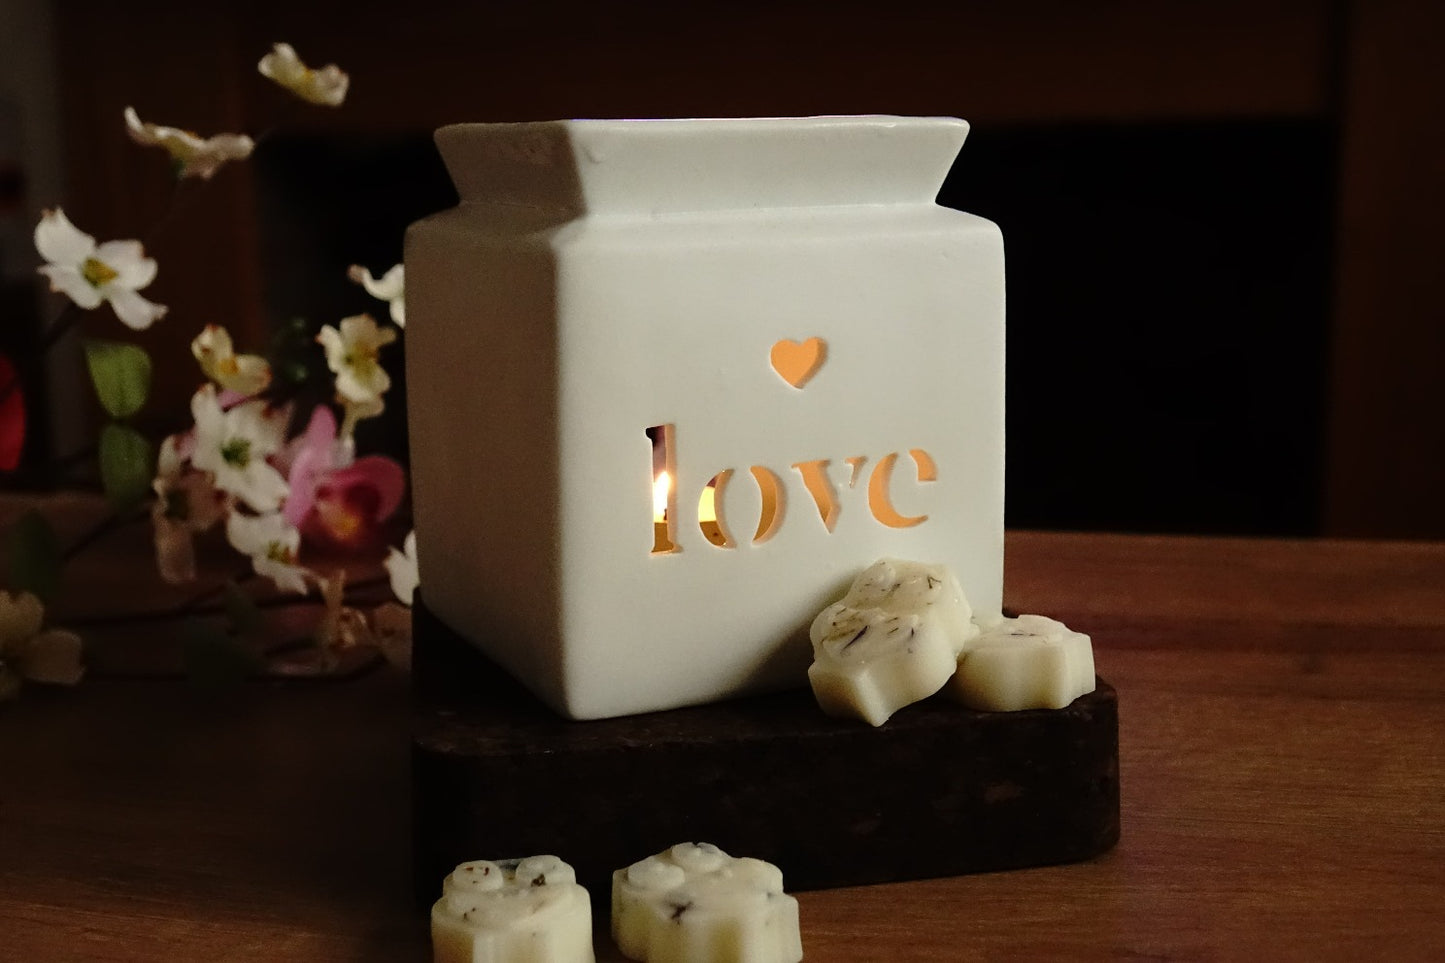 Wite Love Cut Out oil/wax Burner Ric n'Gus Candles